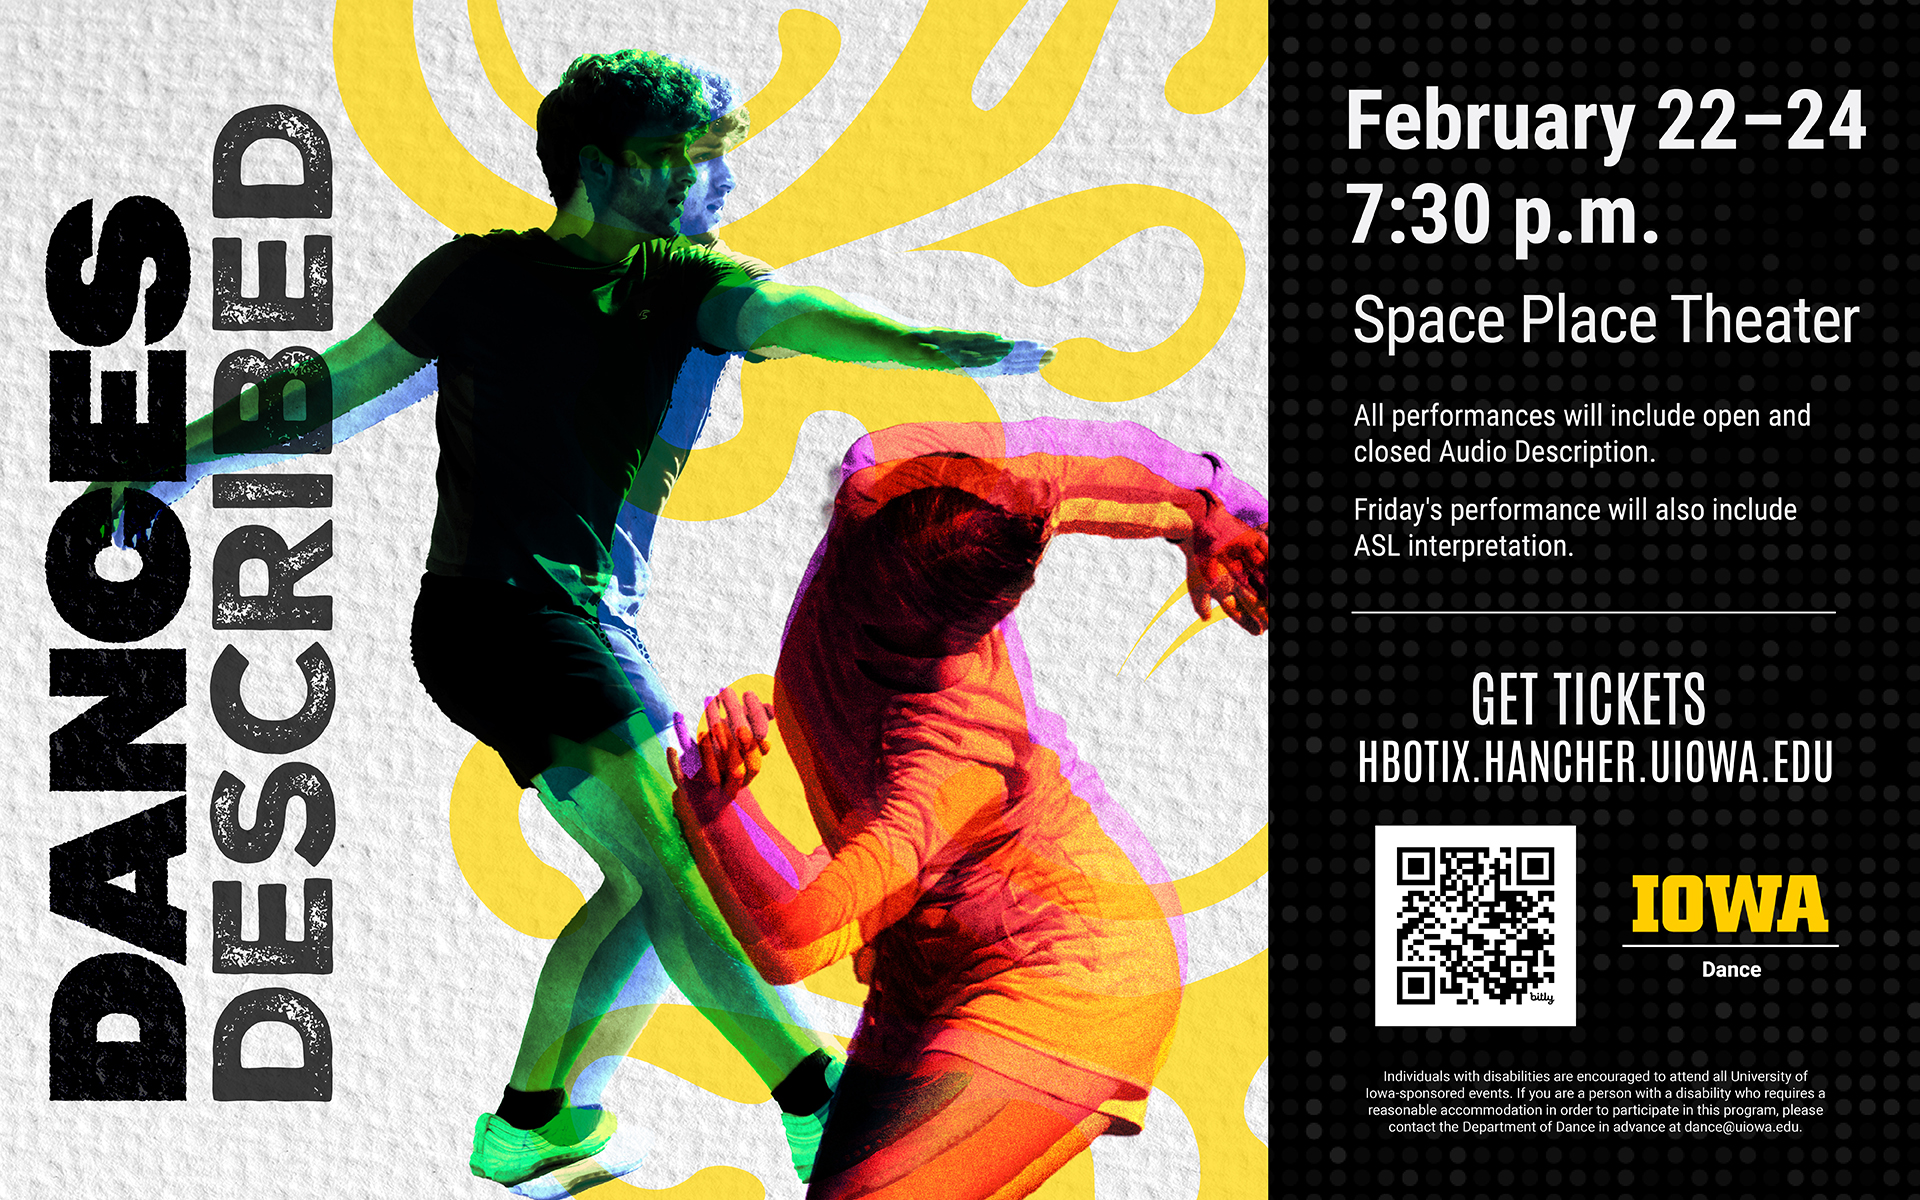 UIDC presents Dances Described February 22-24 at 7:30 p.m. in Space Place Theater